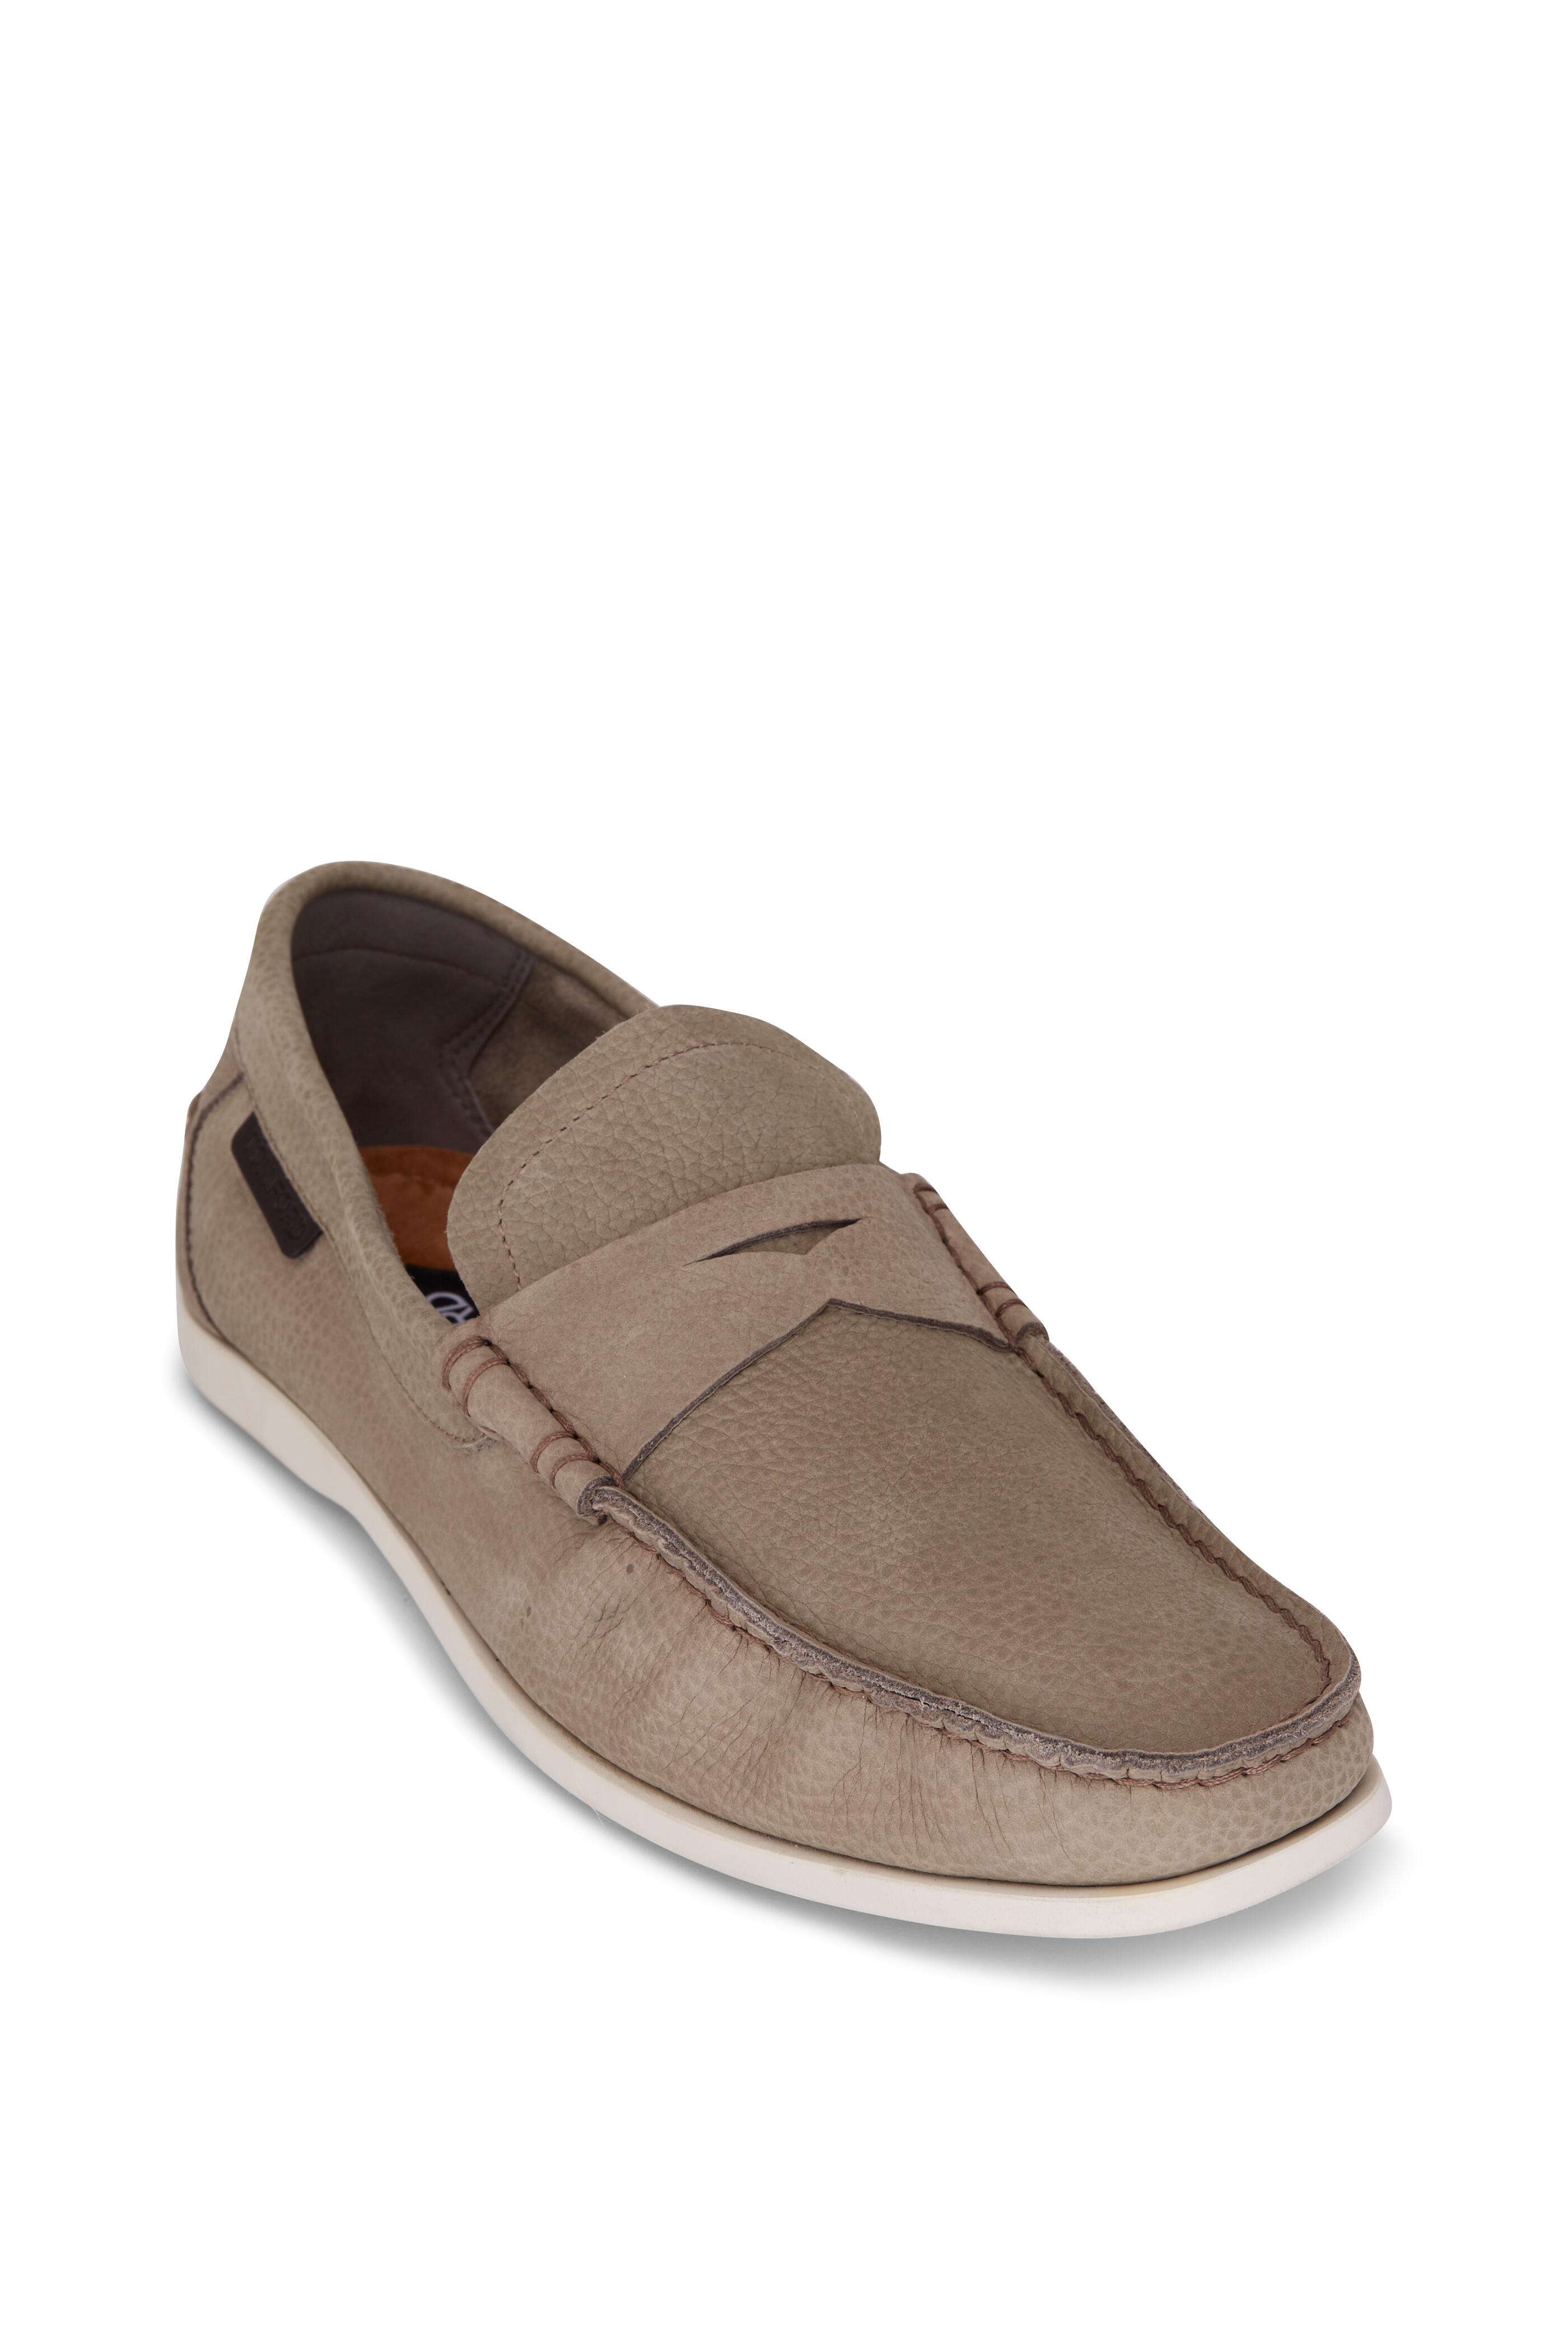 Tom Ford - Sage Nubuck Penny Loafer | Mitchell Stores